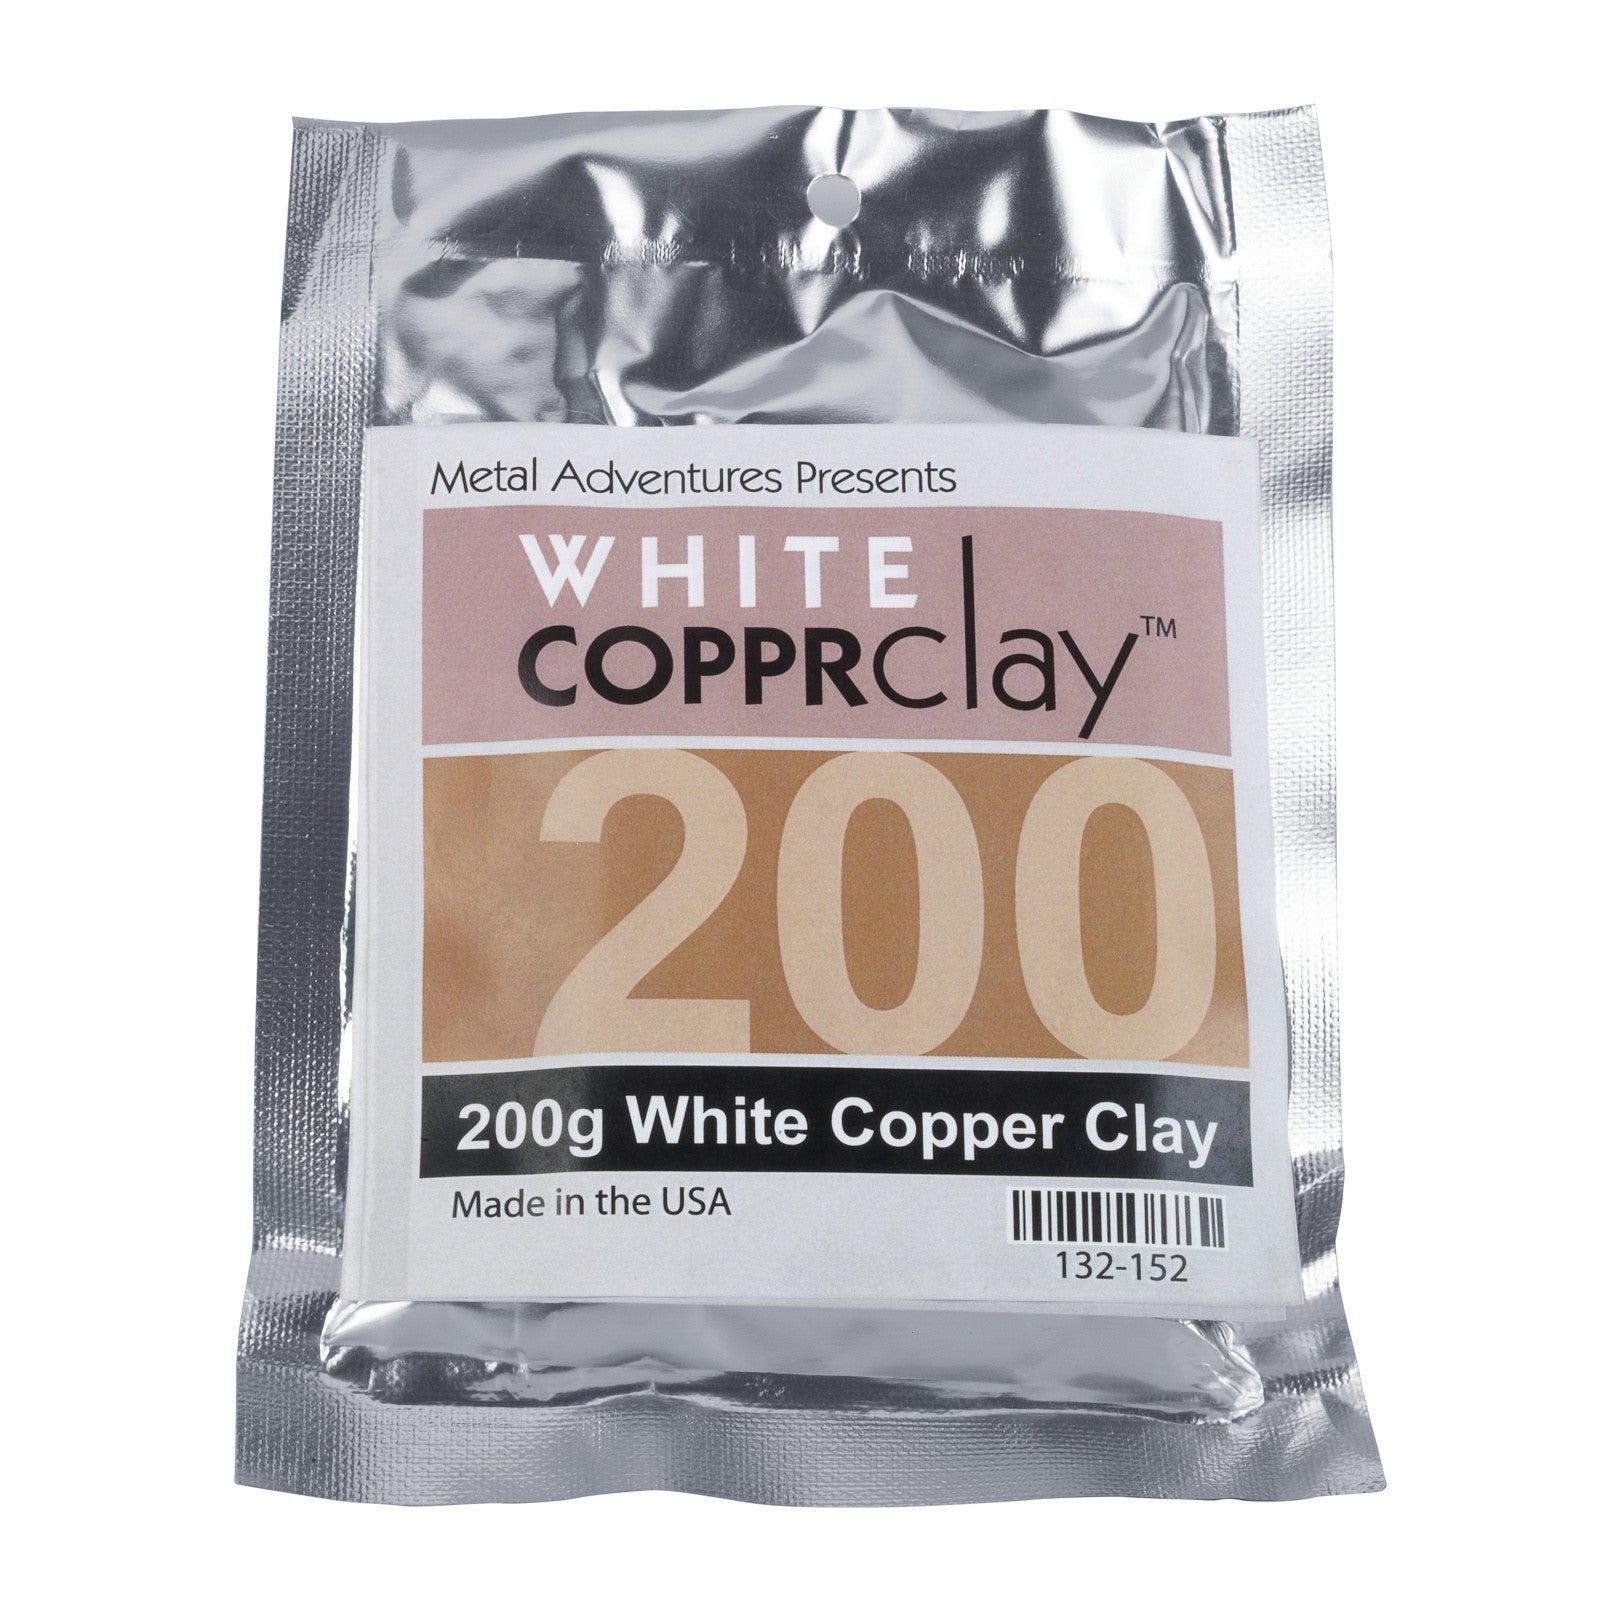 CopprClay White Copper Metal Clay 200gr - MAnufacturer discontinued